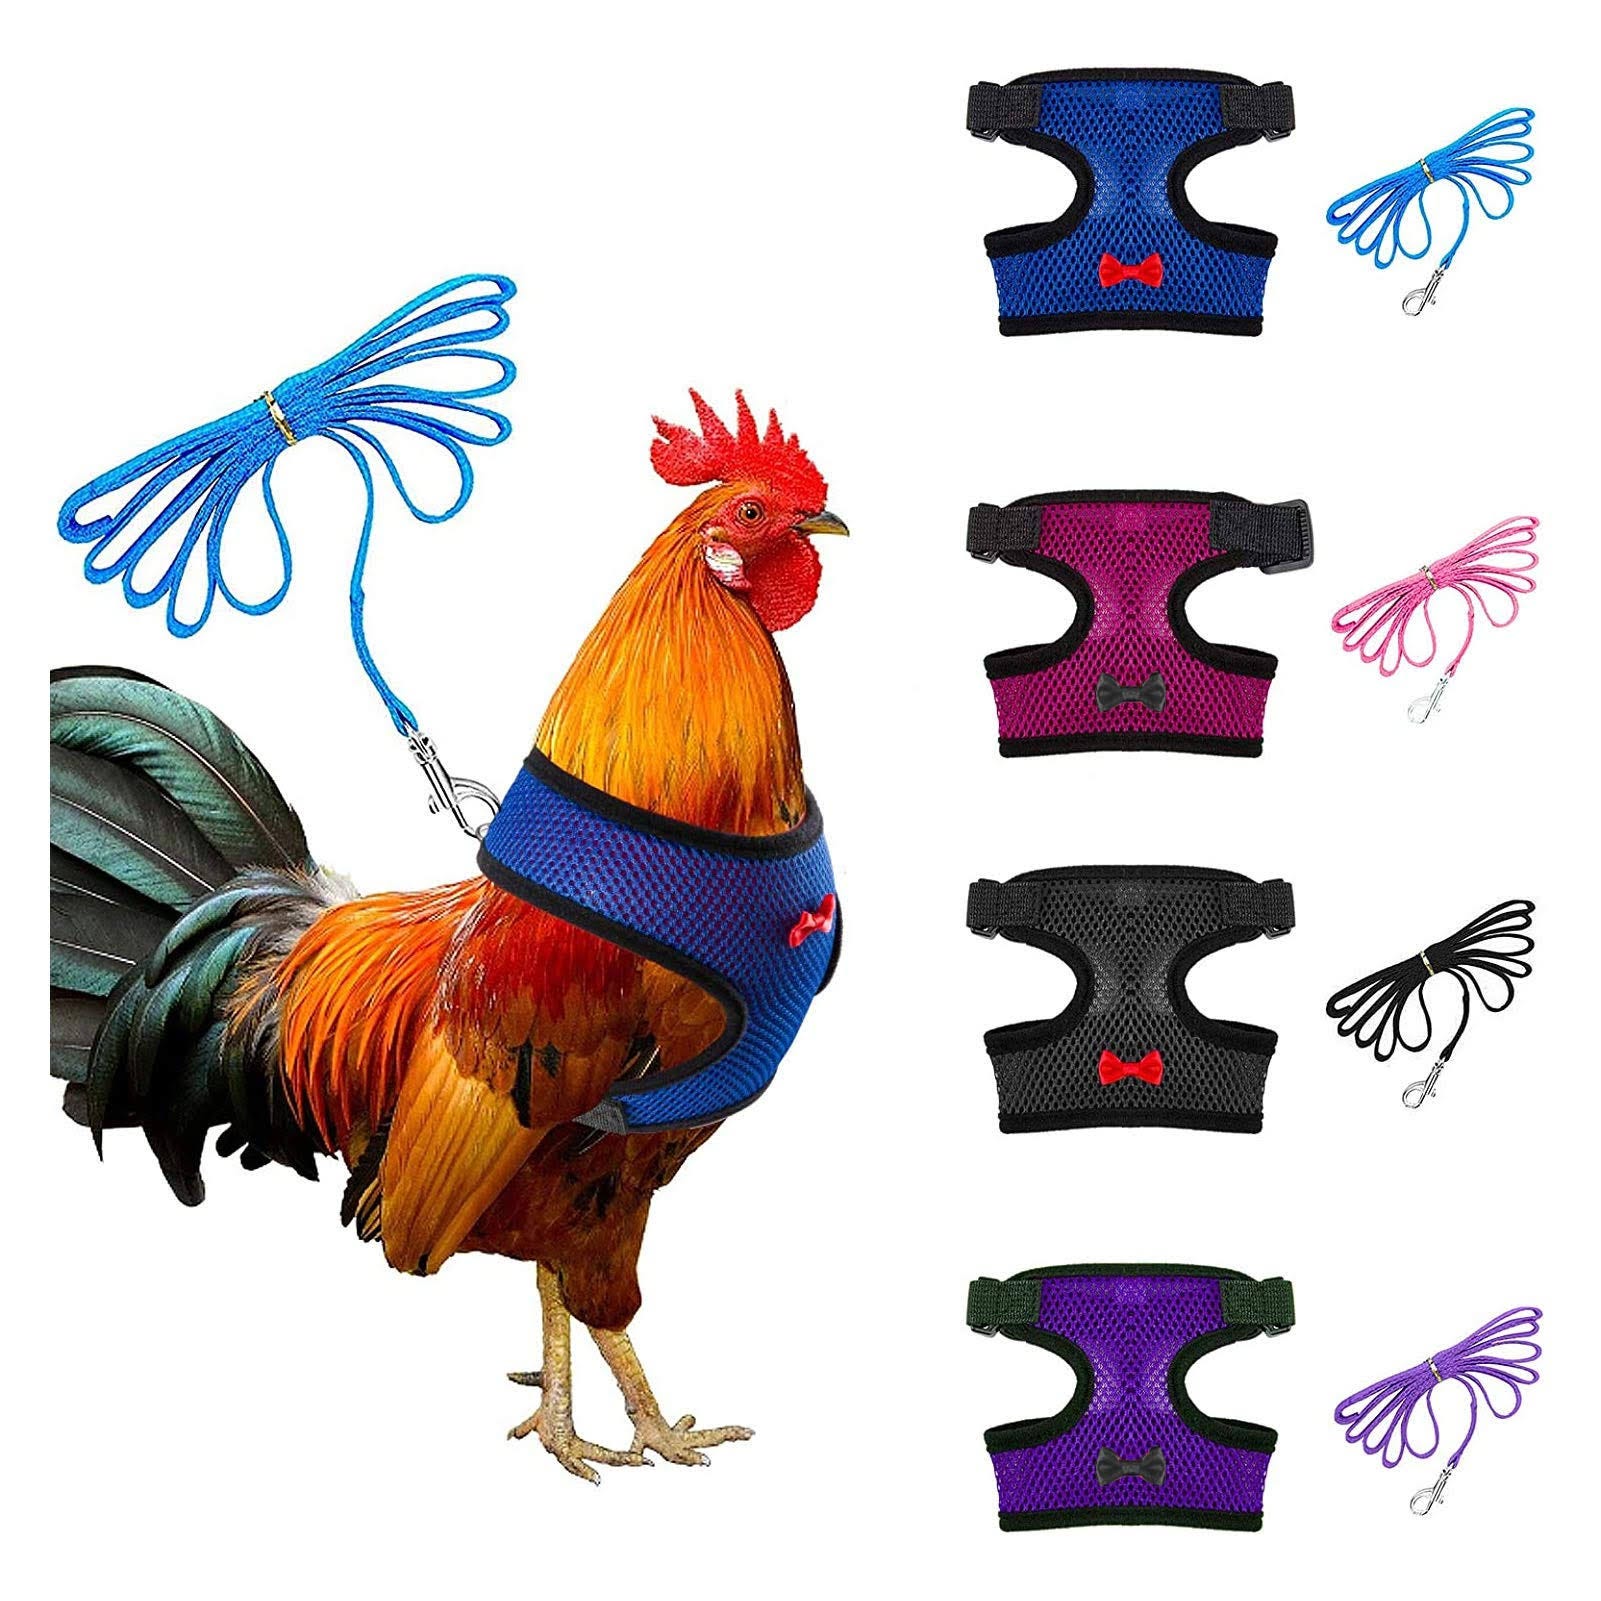 Breathable Nylon Chicken Harness with Adjustable Chest Size - Suitable for Ducks and Small Pets | Image